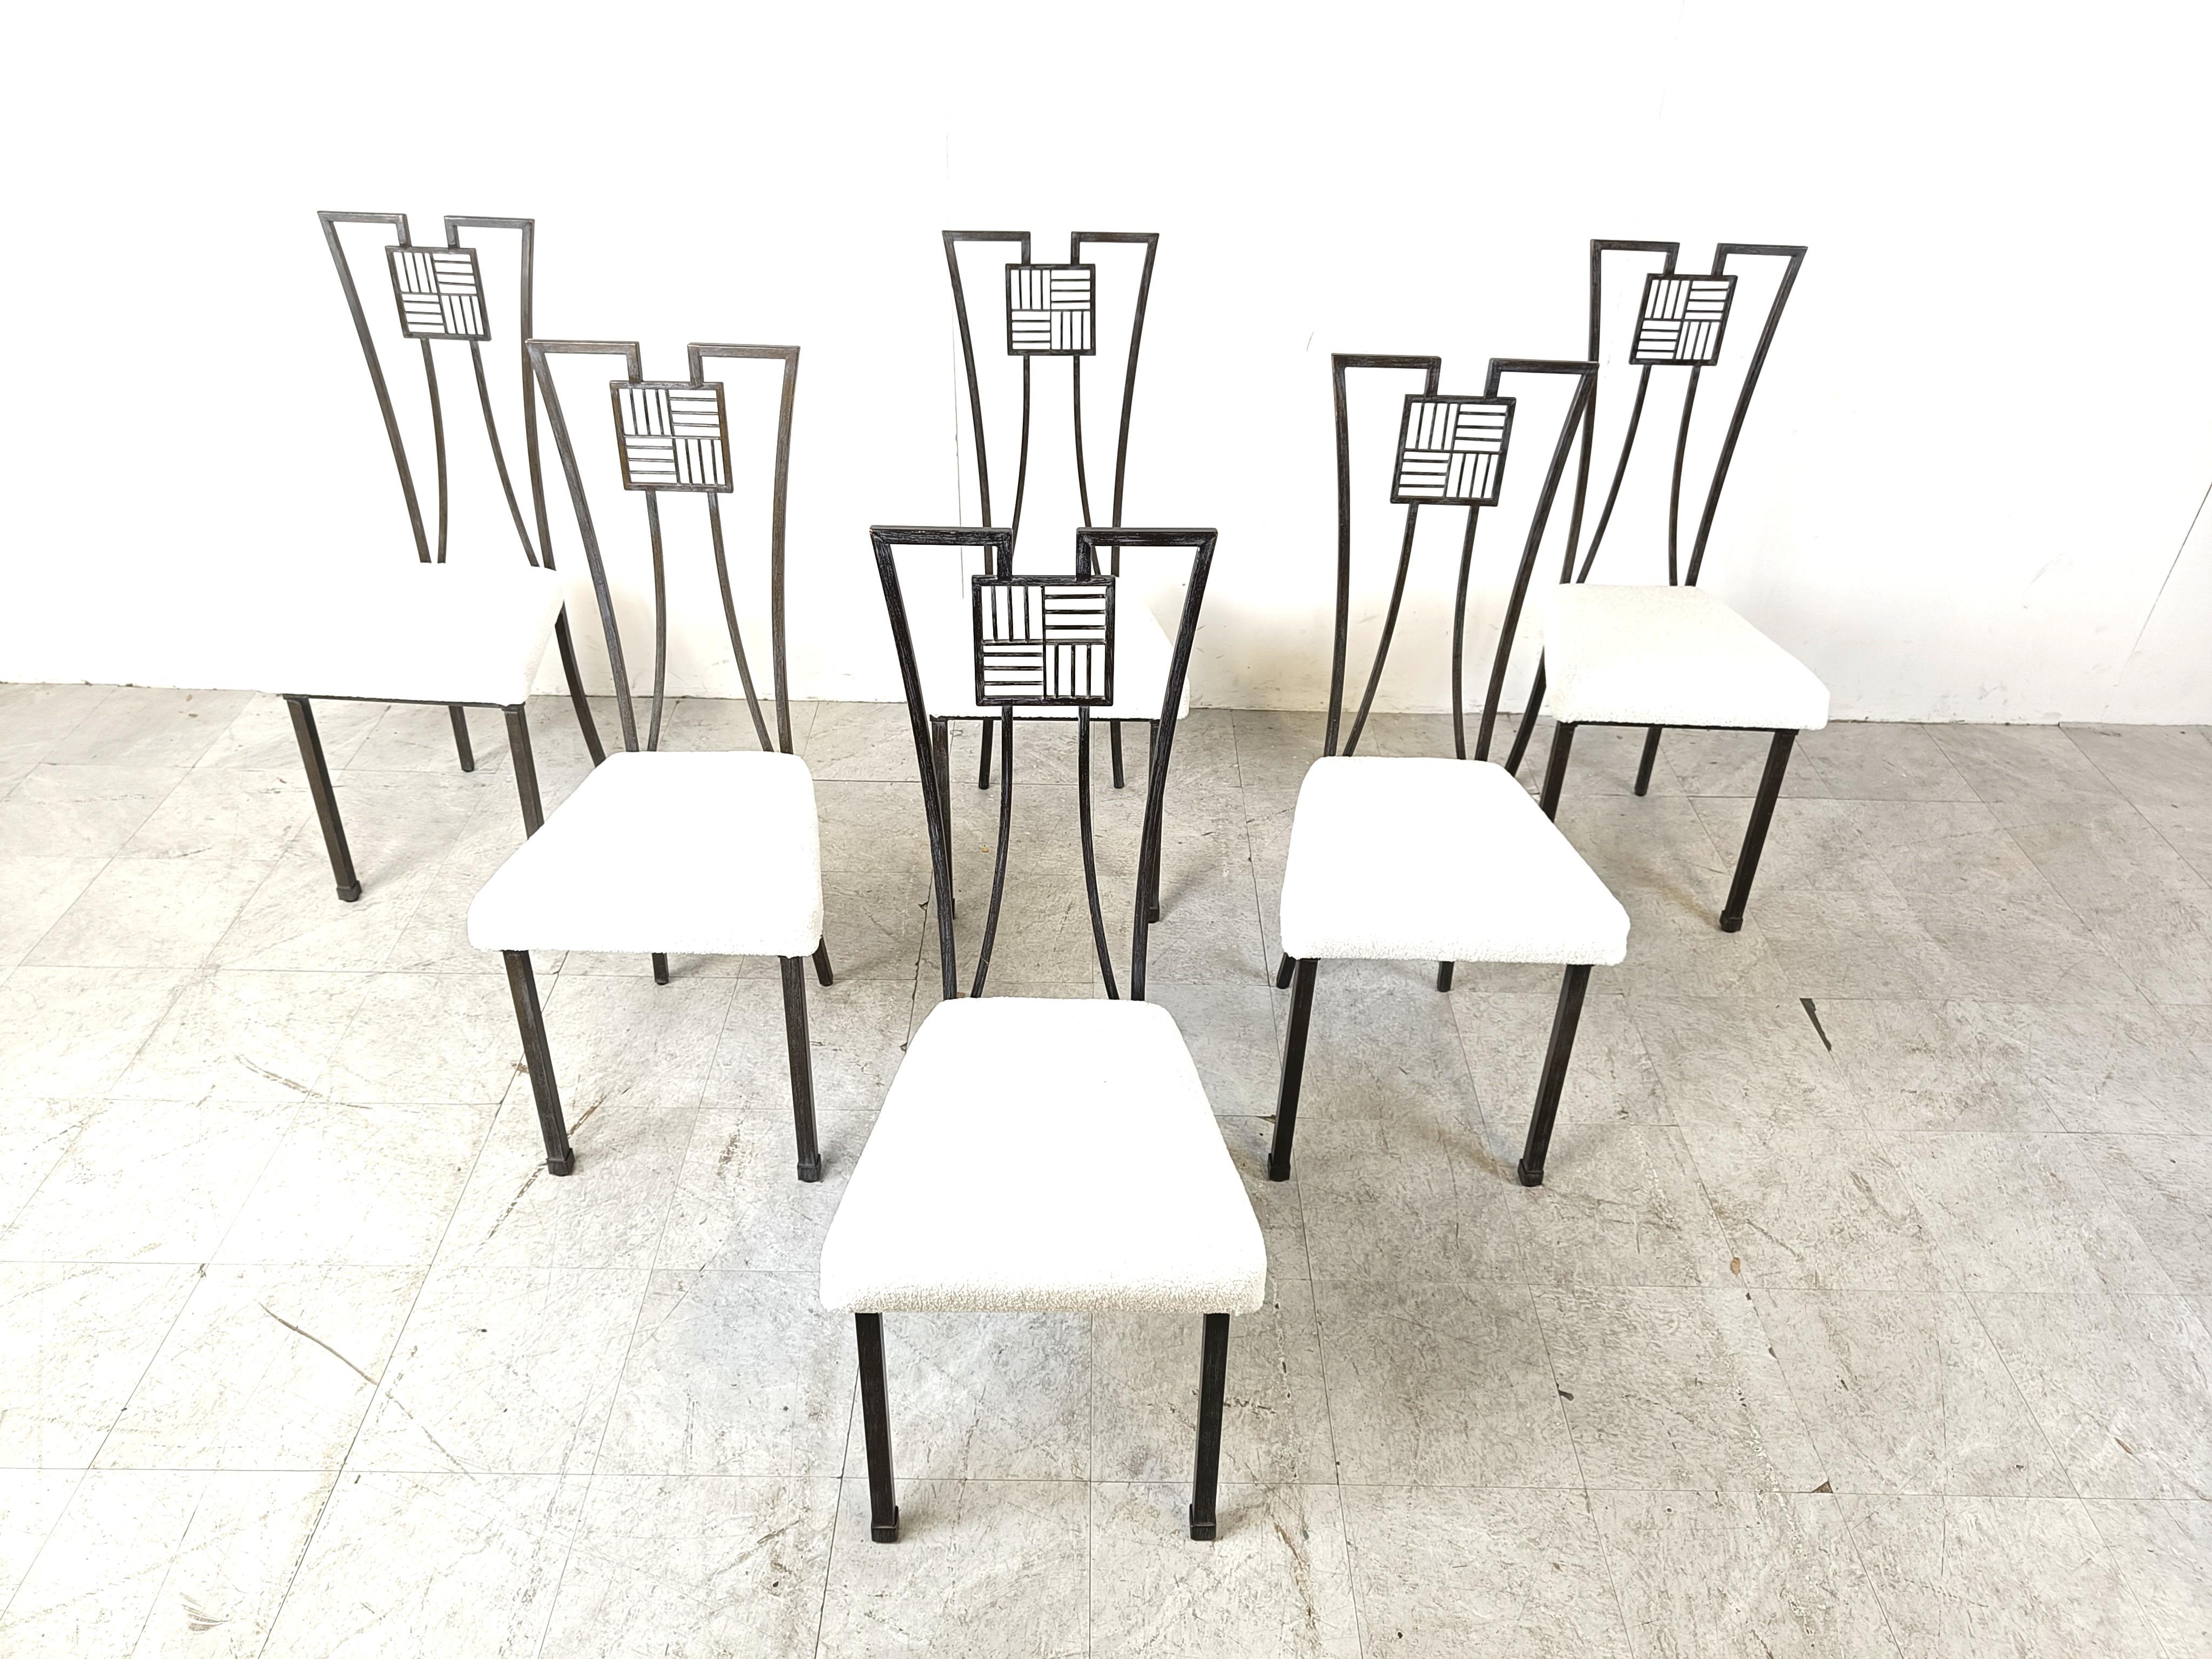 Vintage grey metal dining chairs with high backs designed in japanese style.

Beautiful bent metal frames with a backrest becomming the back legs.

Reupholstered in a fresh white bouclé fabric.

1980s - Italy

Dimensions:
Height: 108cm
Width x